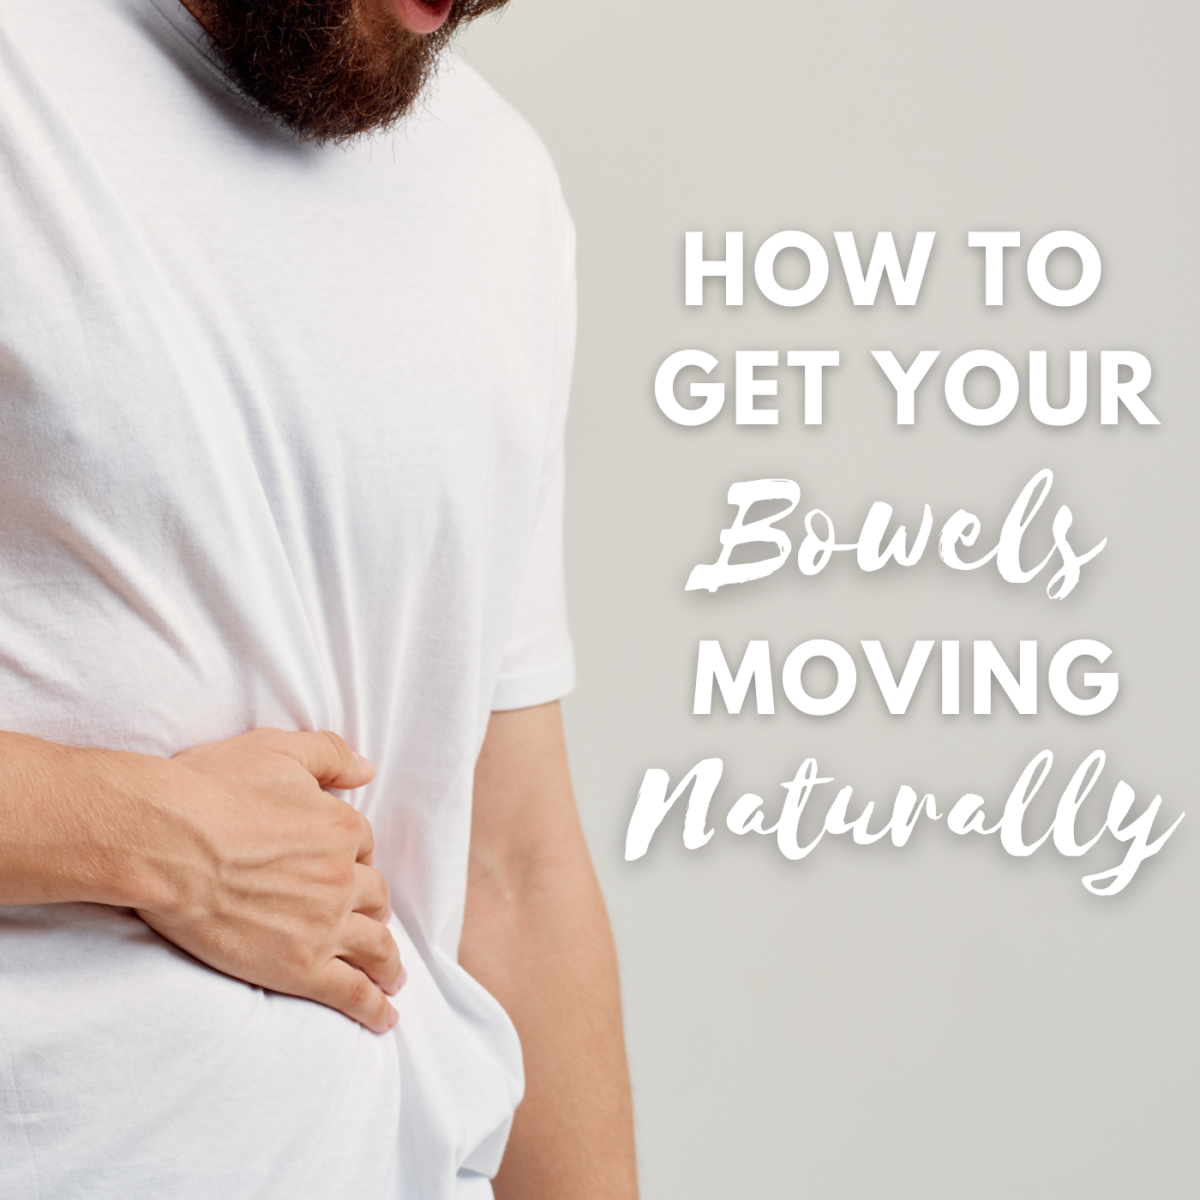 7 Tips To Get Your Bowels Moving Naturally 